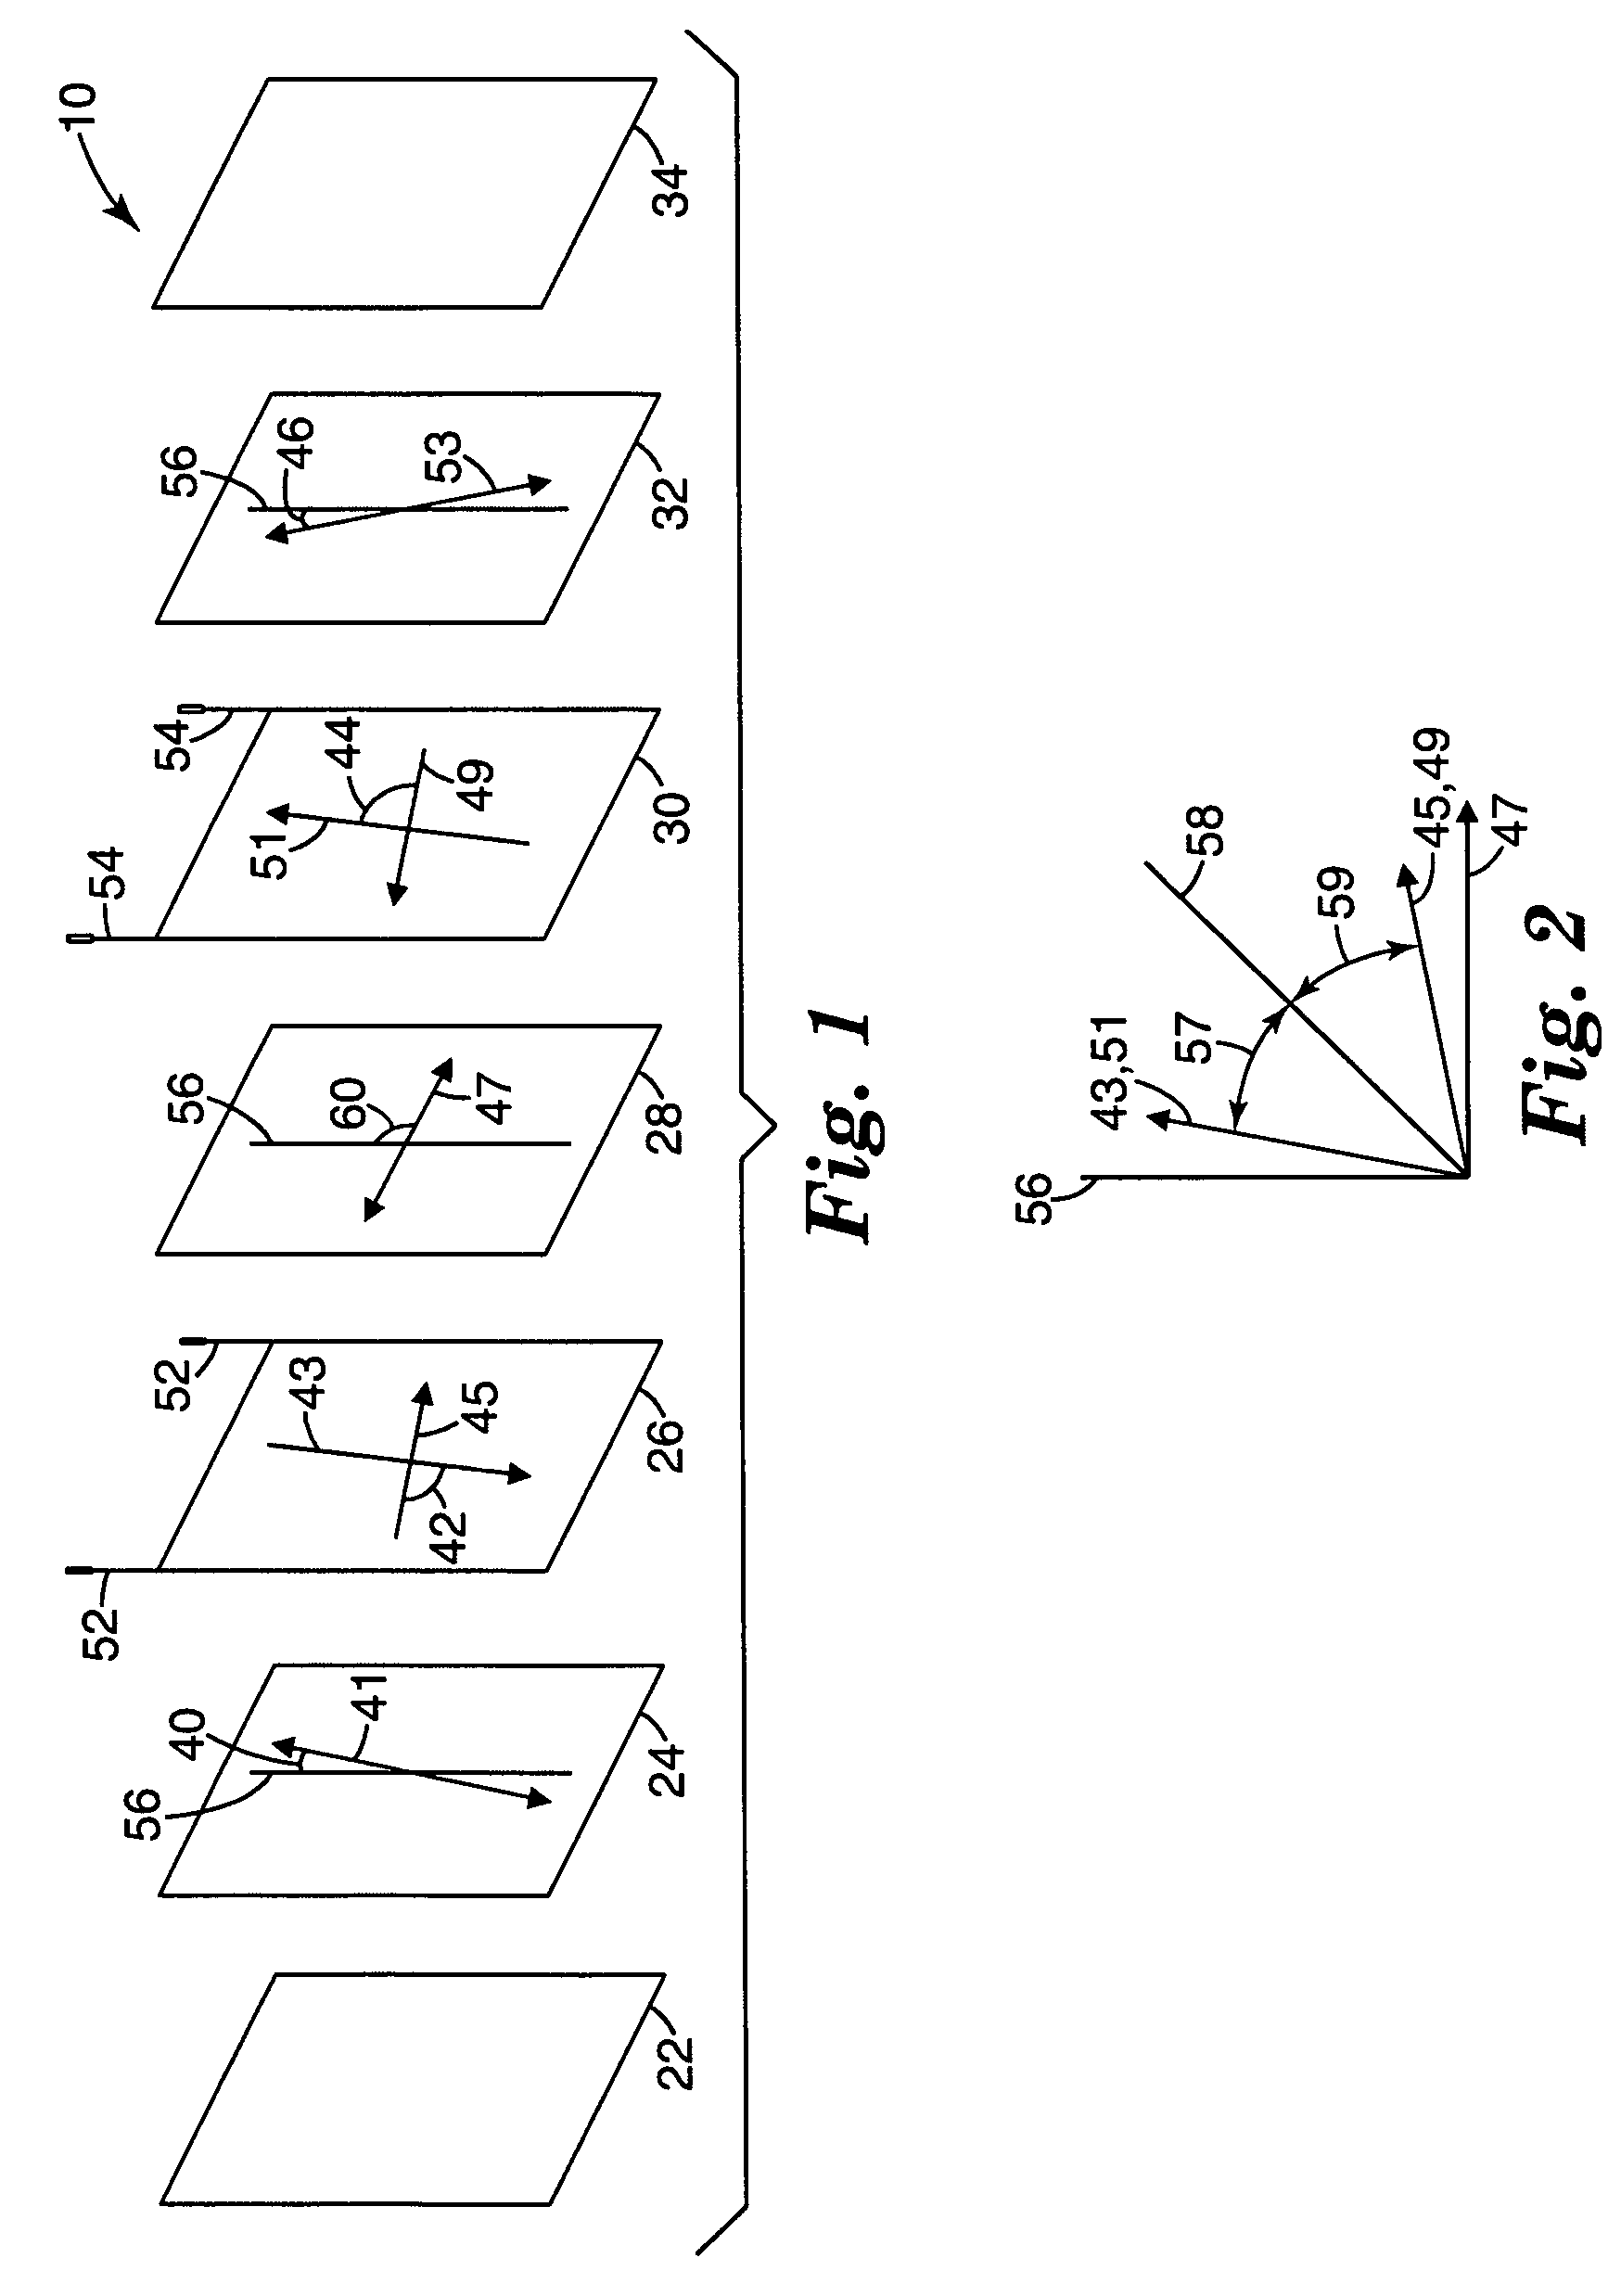 Automatic darkening filter with offset polarizers